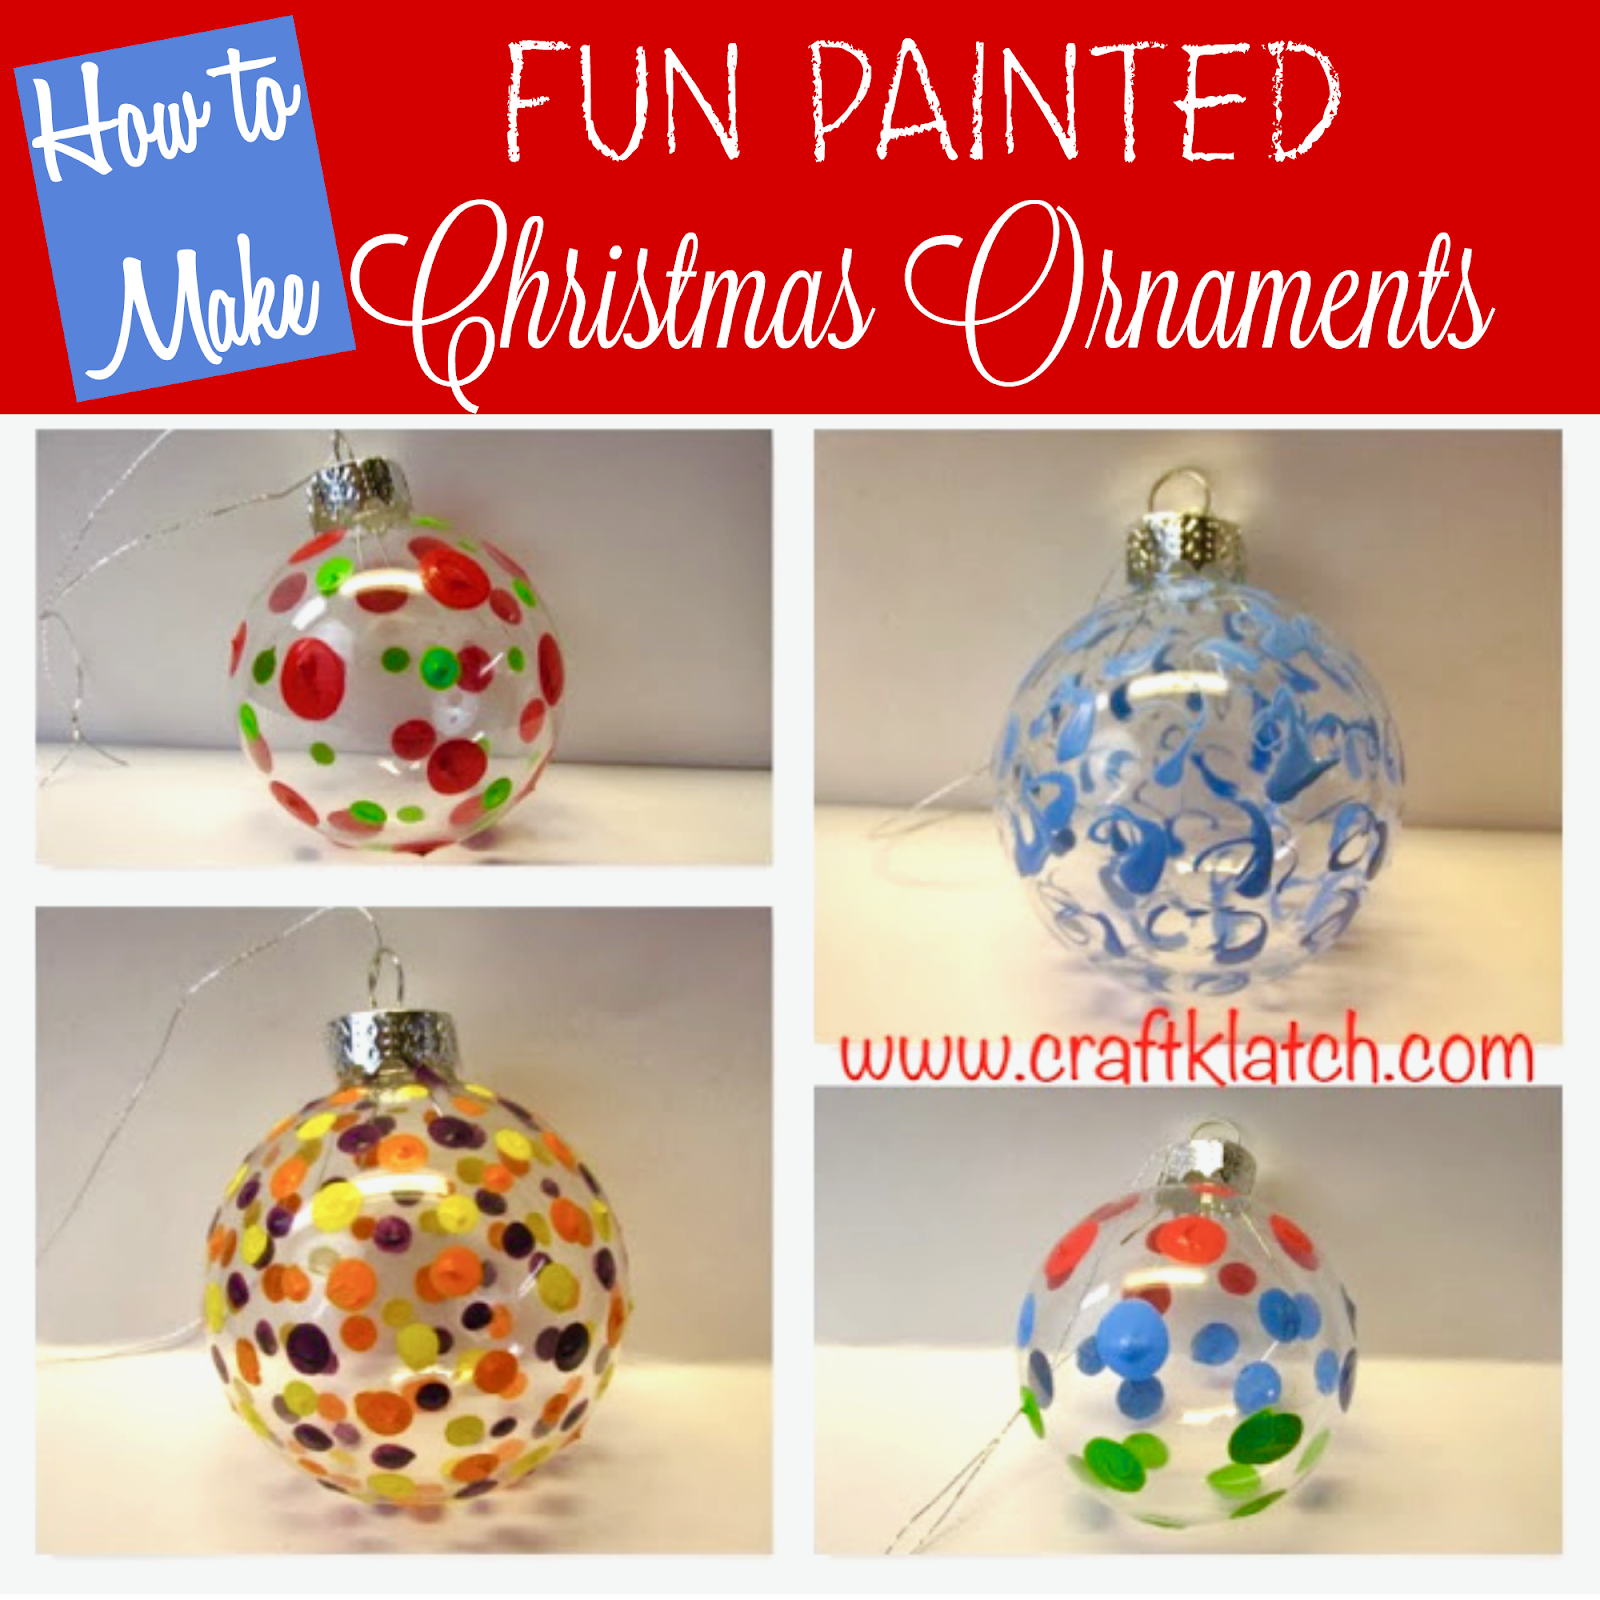 Fun Painted Christmas Ornaments How To - Craft Klatch